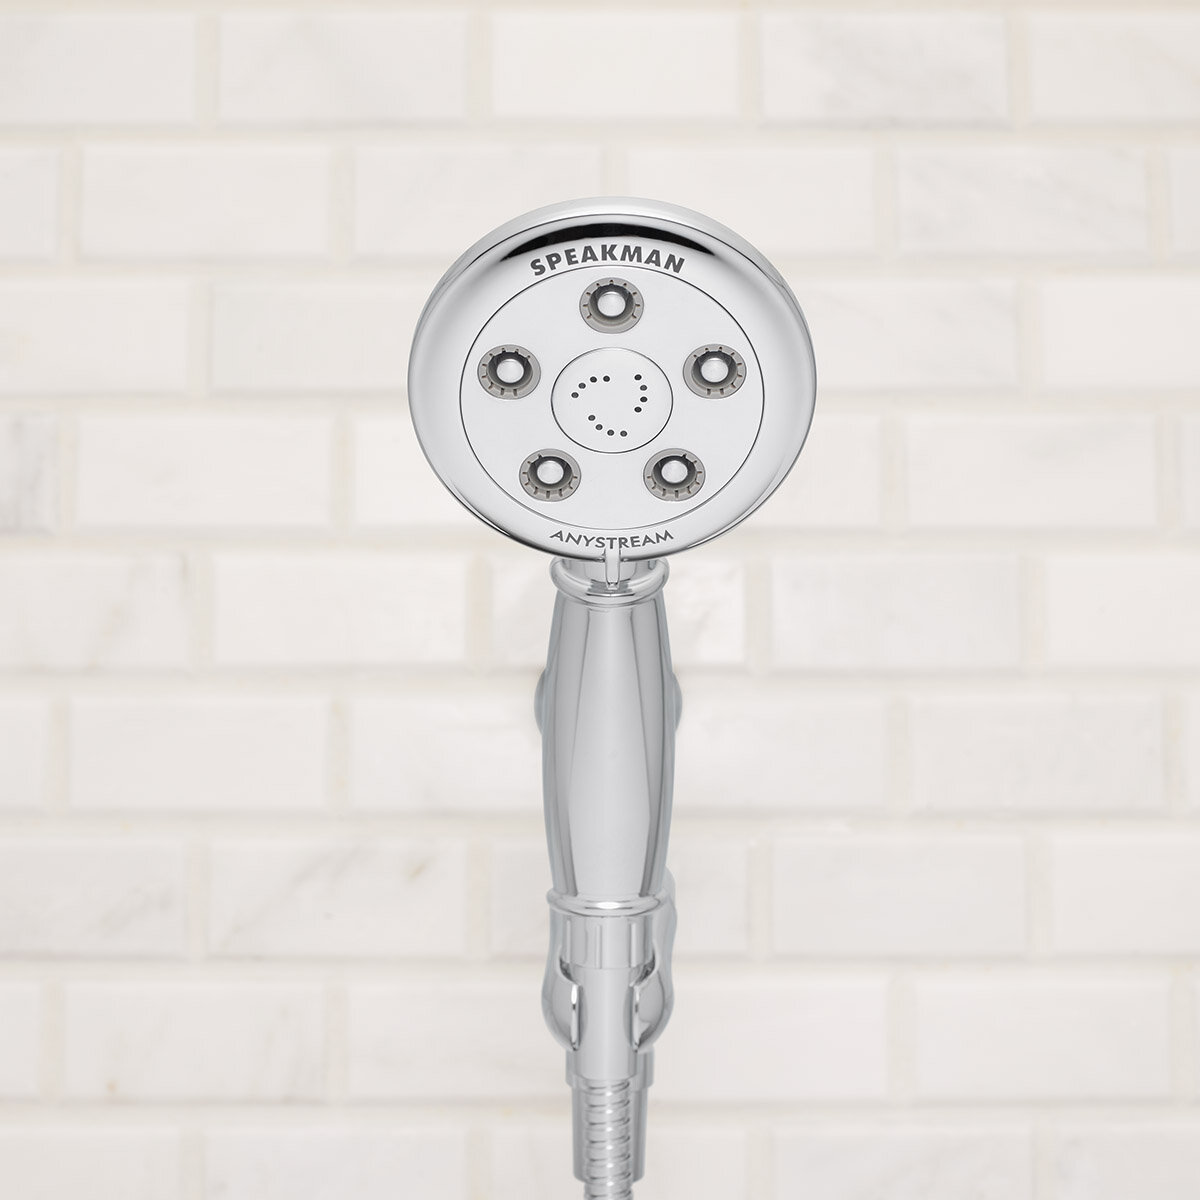 Polished Chrome Speakman VS-3010 Neo Anystream High Pressure Handheld Shower Head with Hose 2.5 GPM